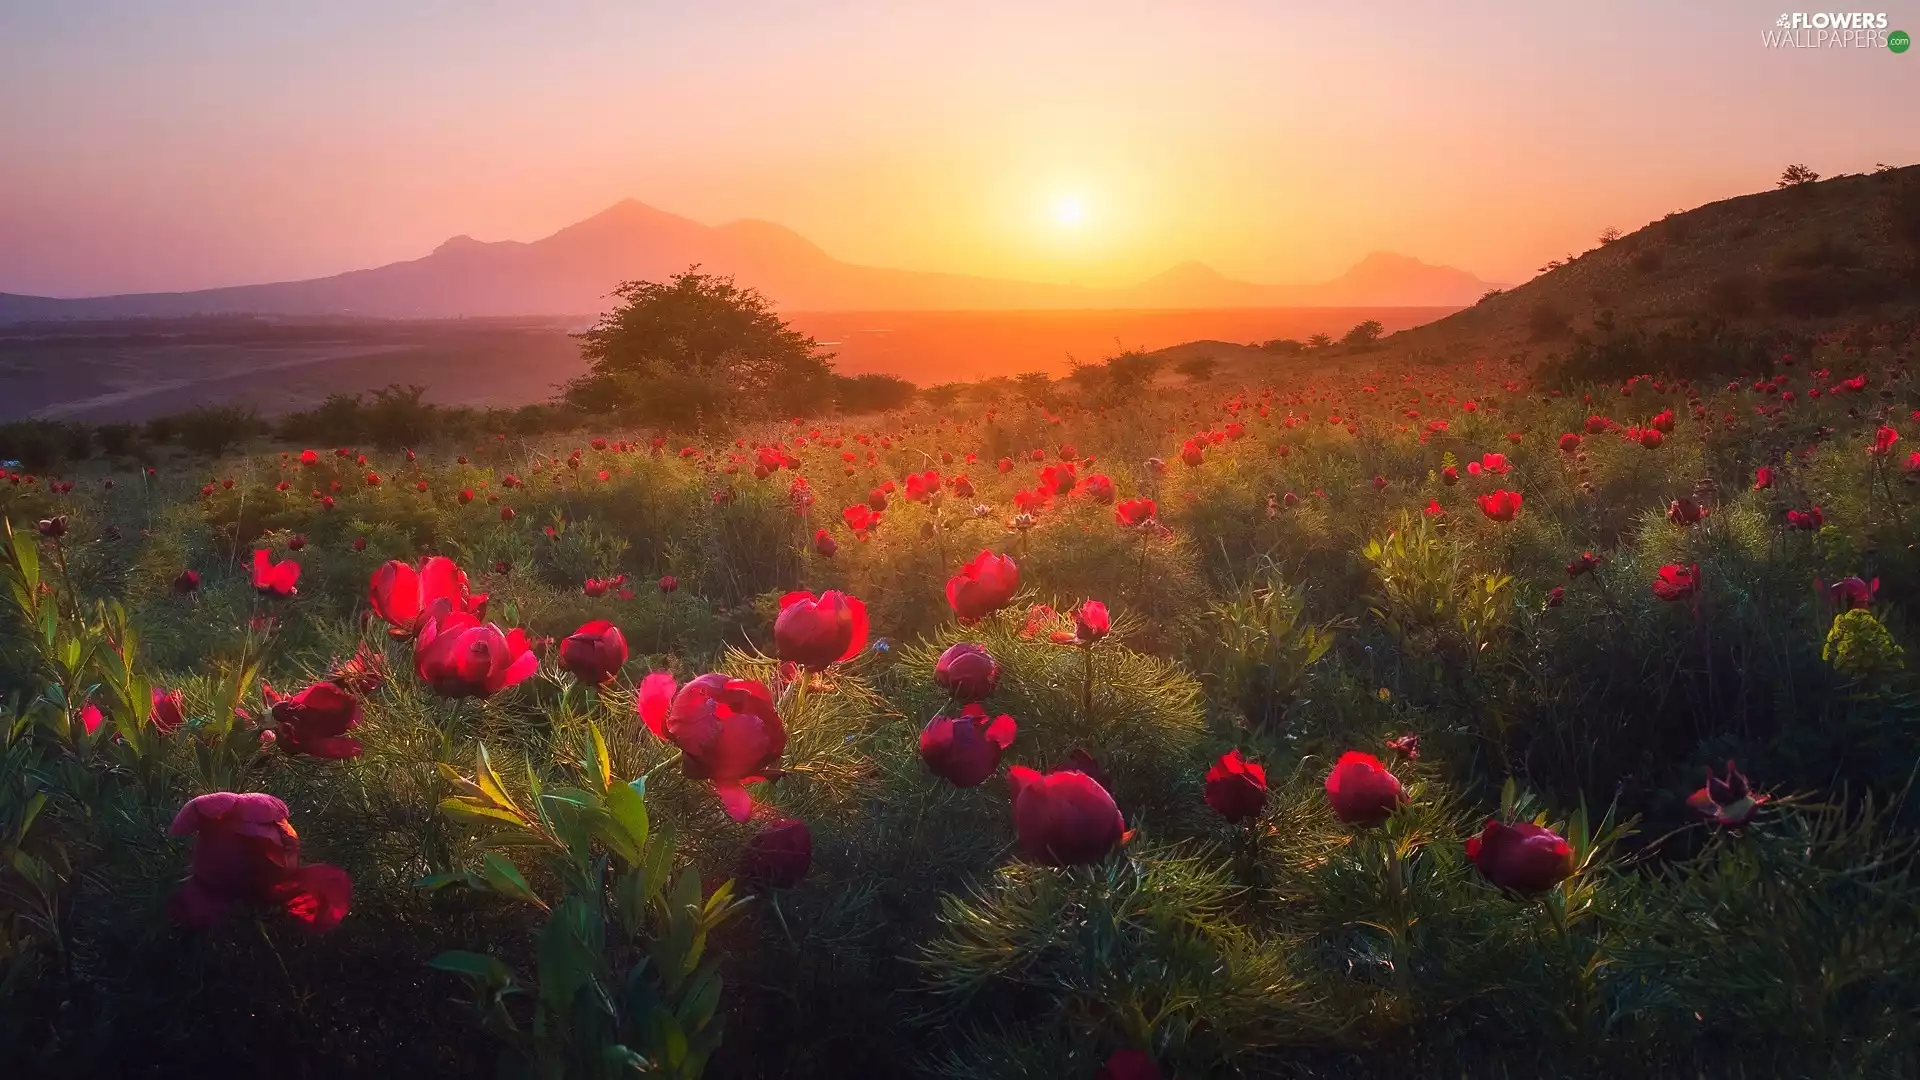 trees, Mountains, Peonies, Field, Great Sunsets, Flowers, Meadow